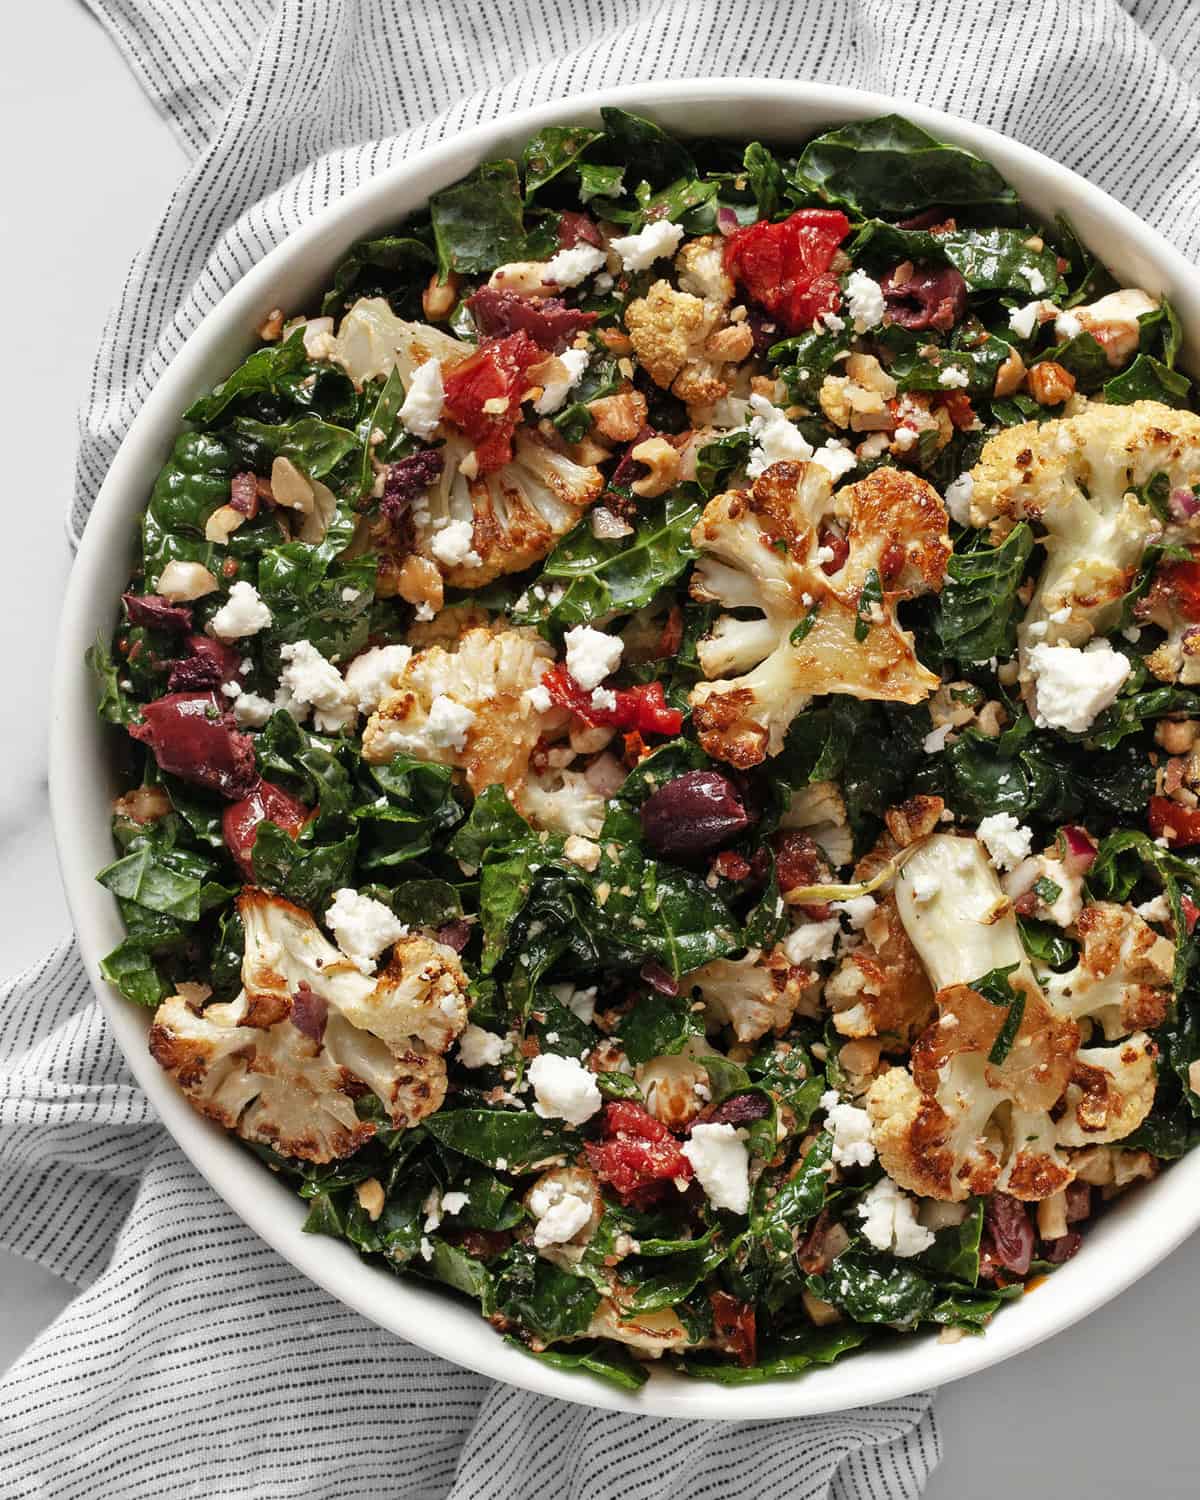 Cauliflower kale salad with tomatoes and olives in a bowl.